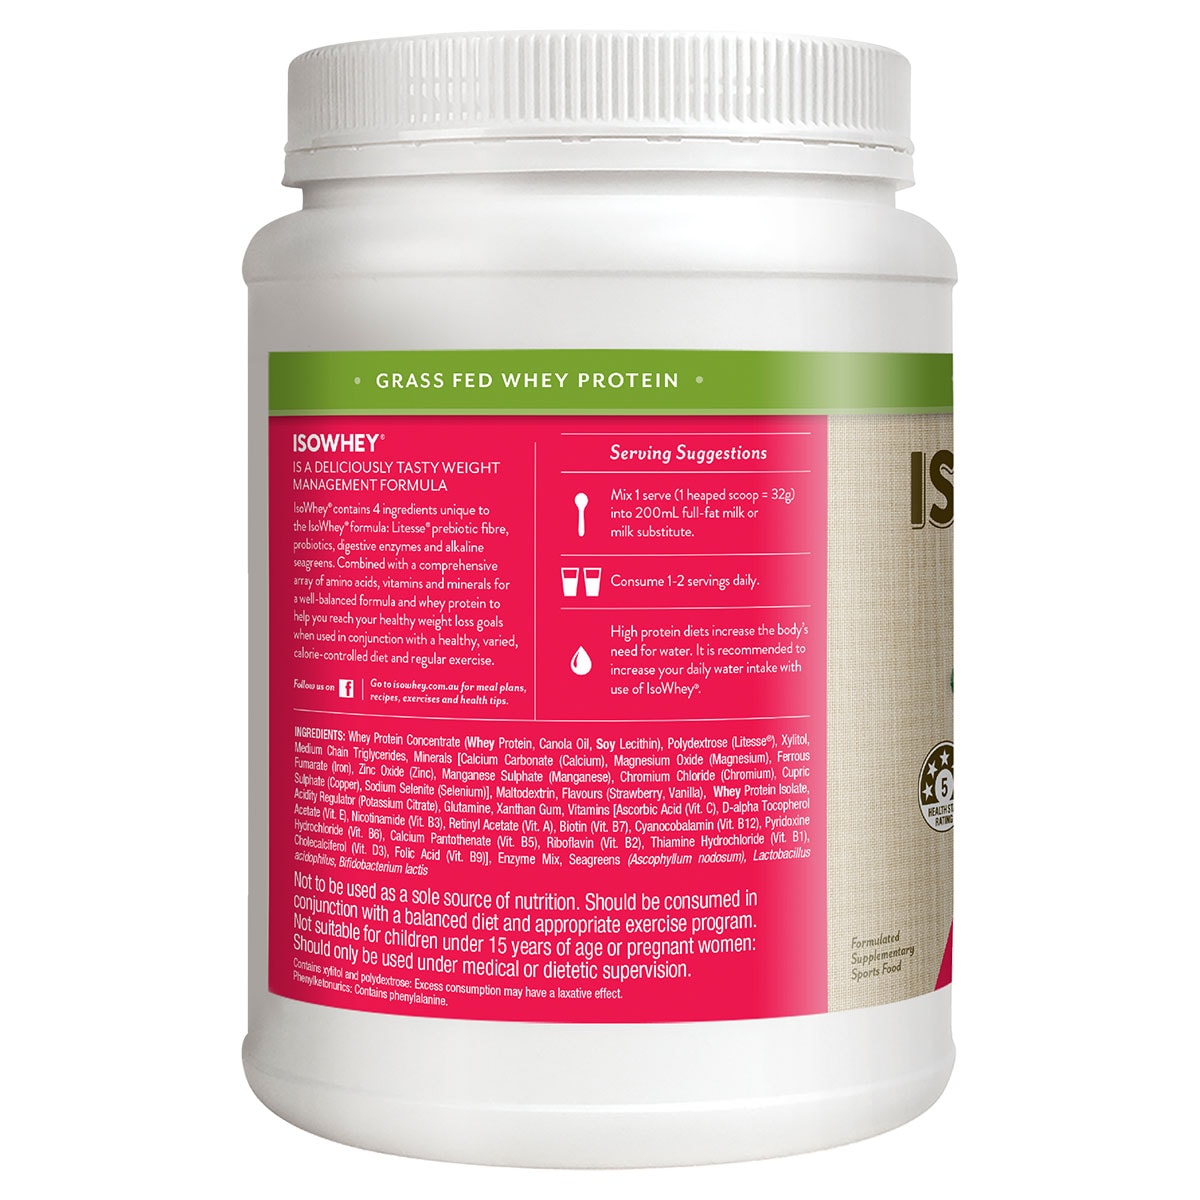 IsoWhey Complete Strawberry Smoothie 672g